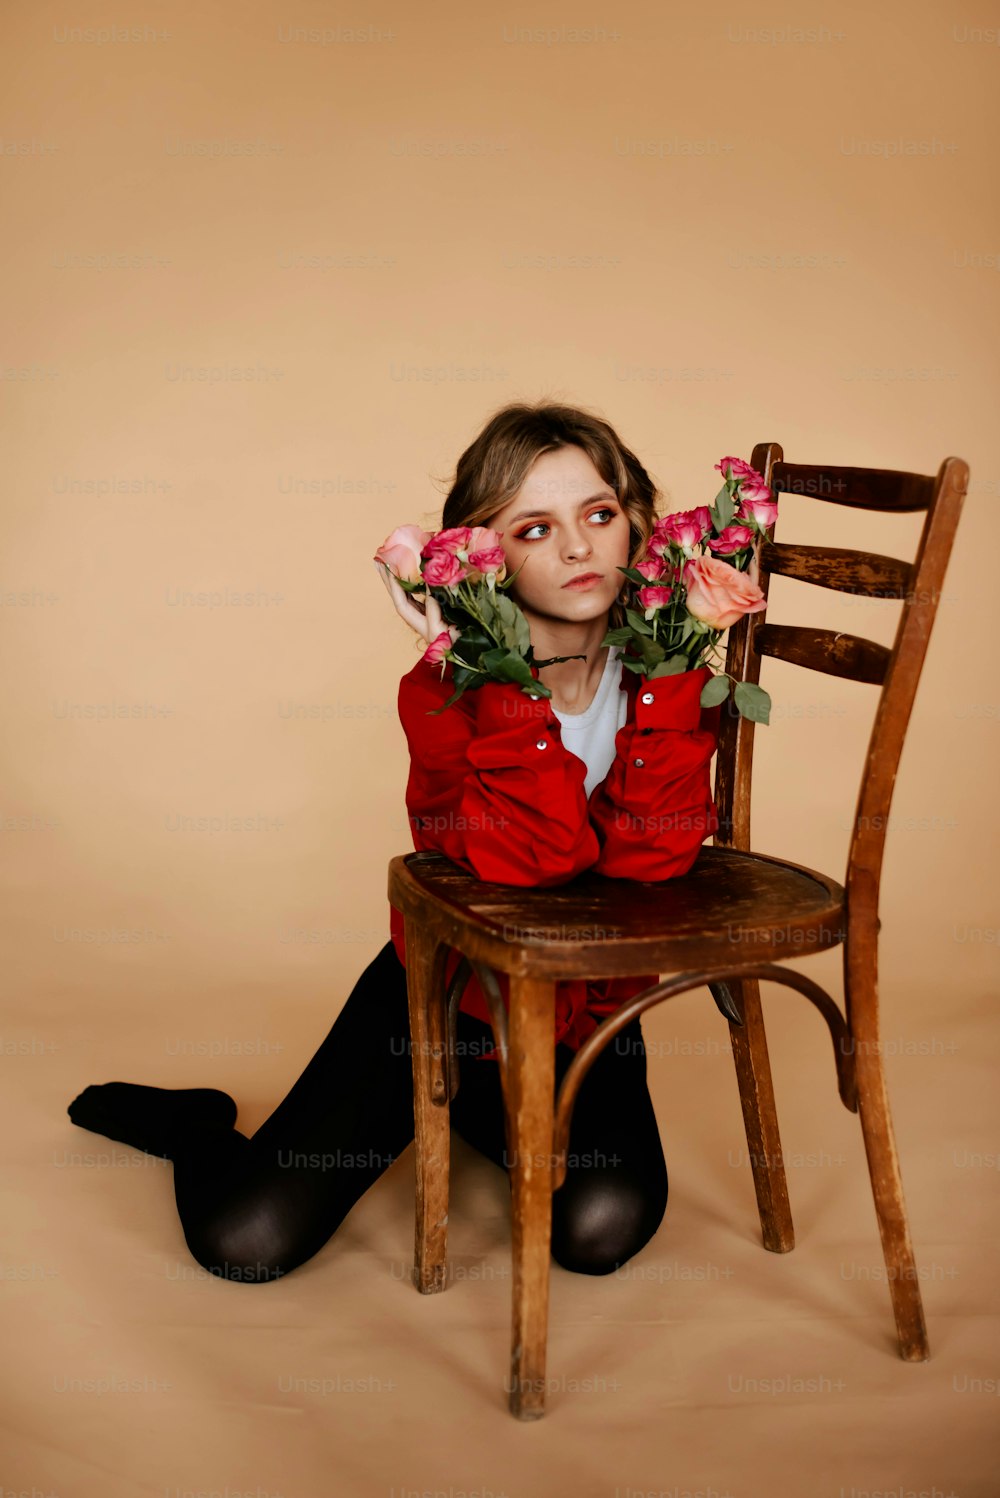 a girl sitting on a chair with flowers in her hair